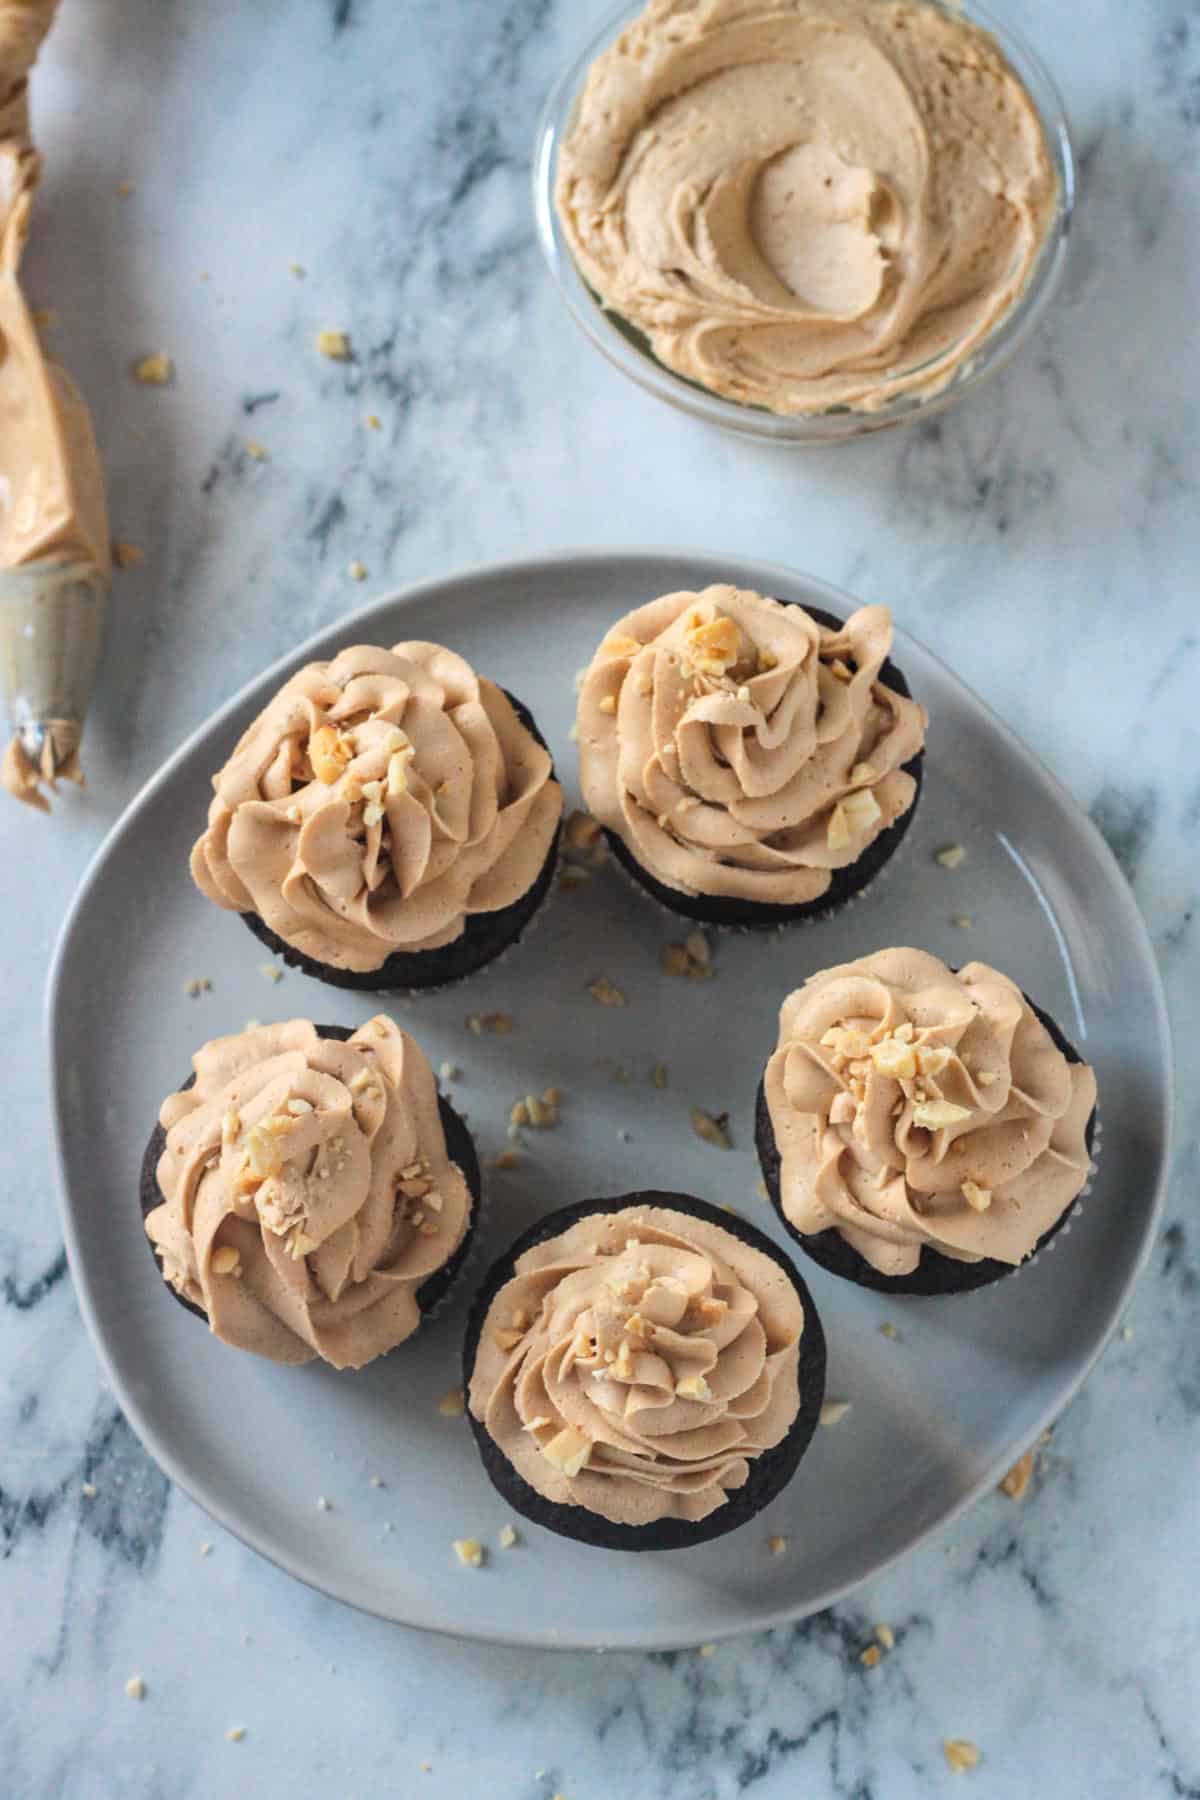 Cupcakes topped with vegan peanut butter frosting on a plate.